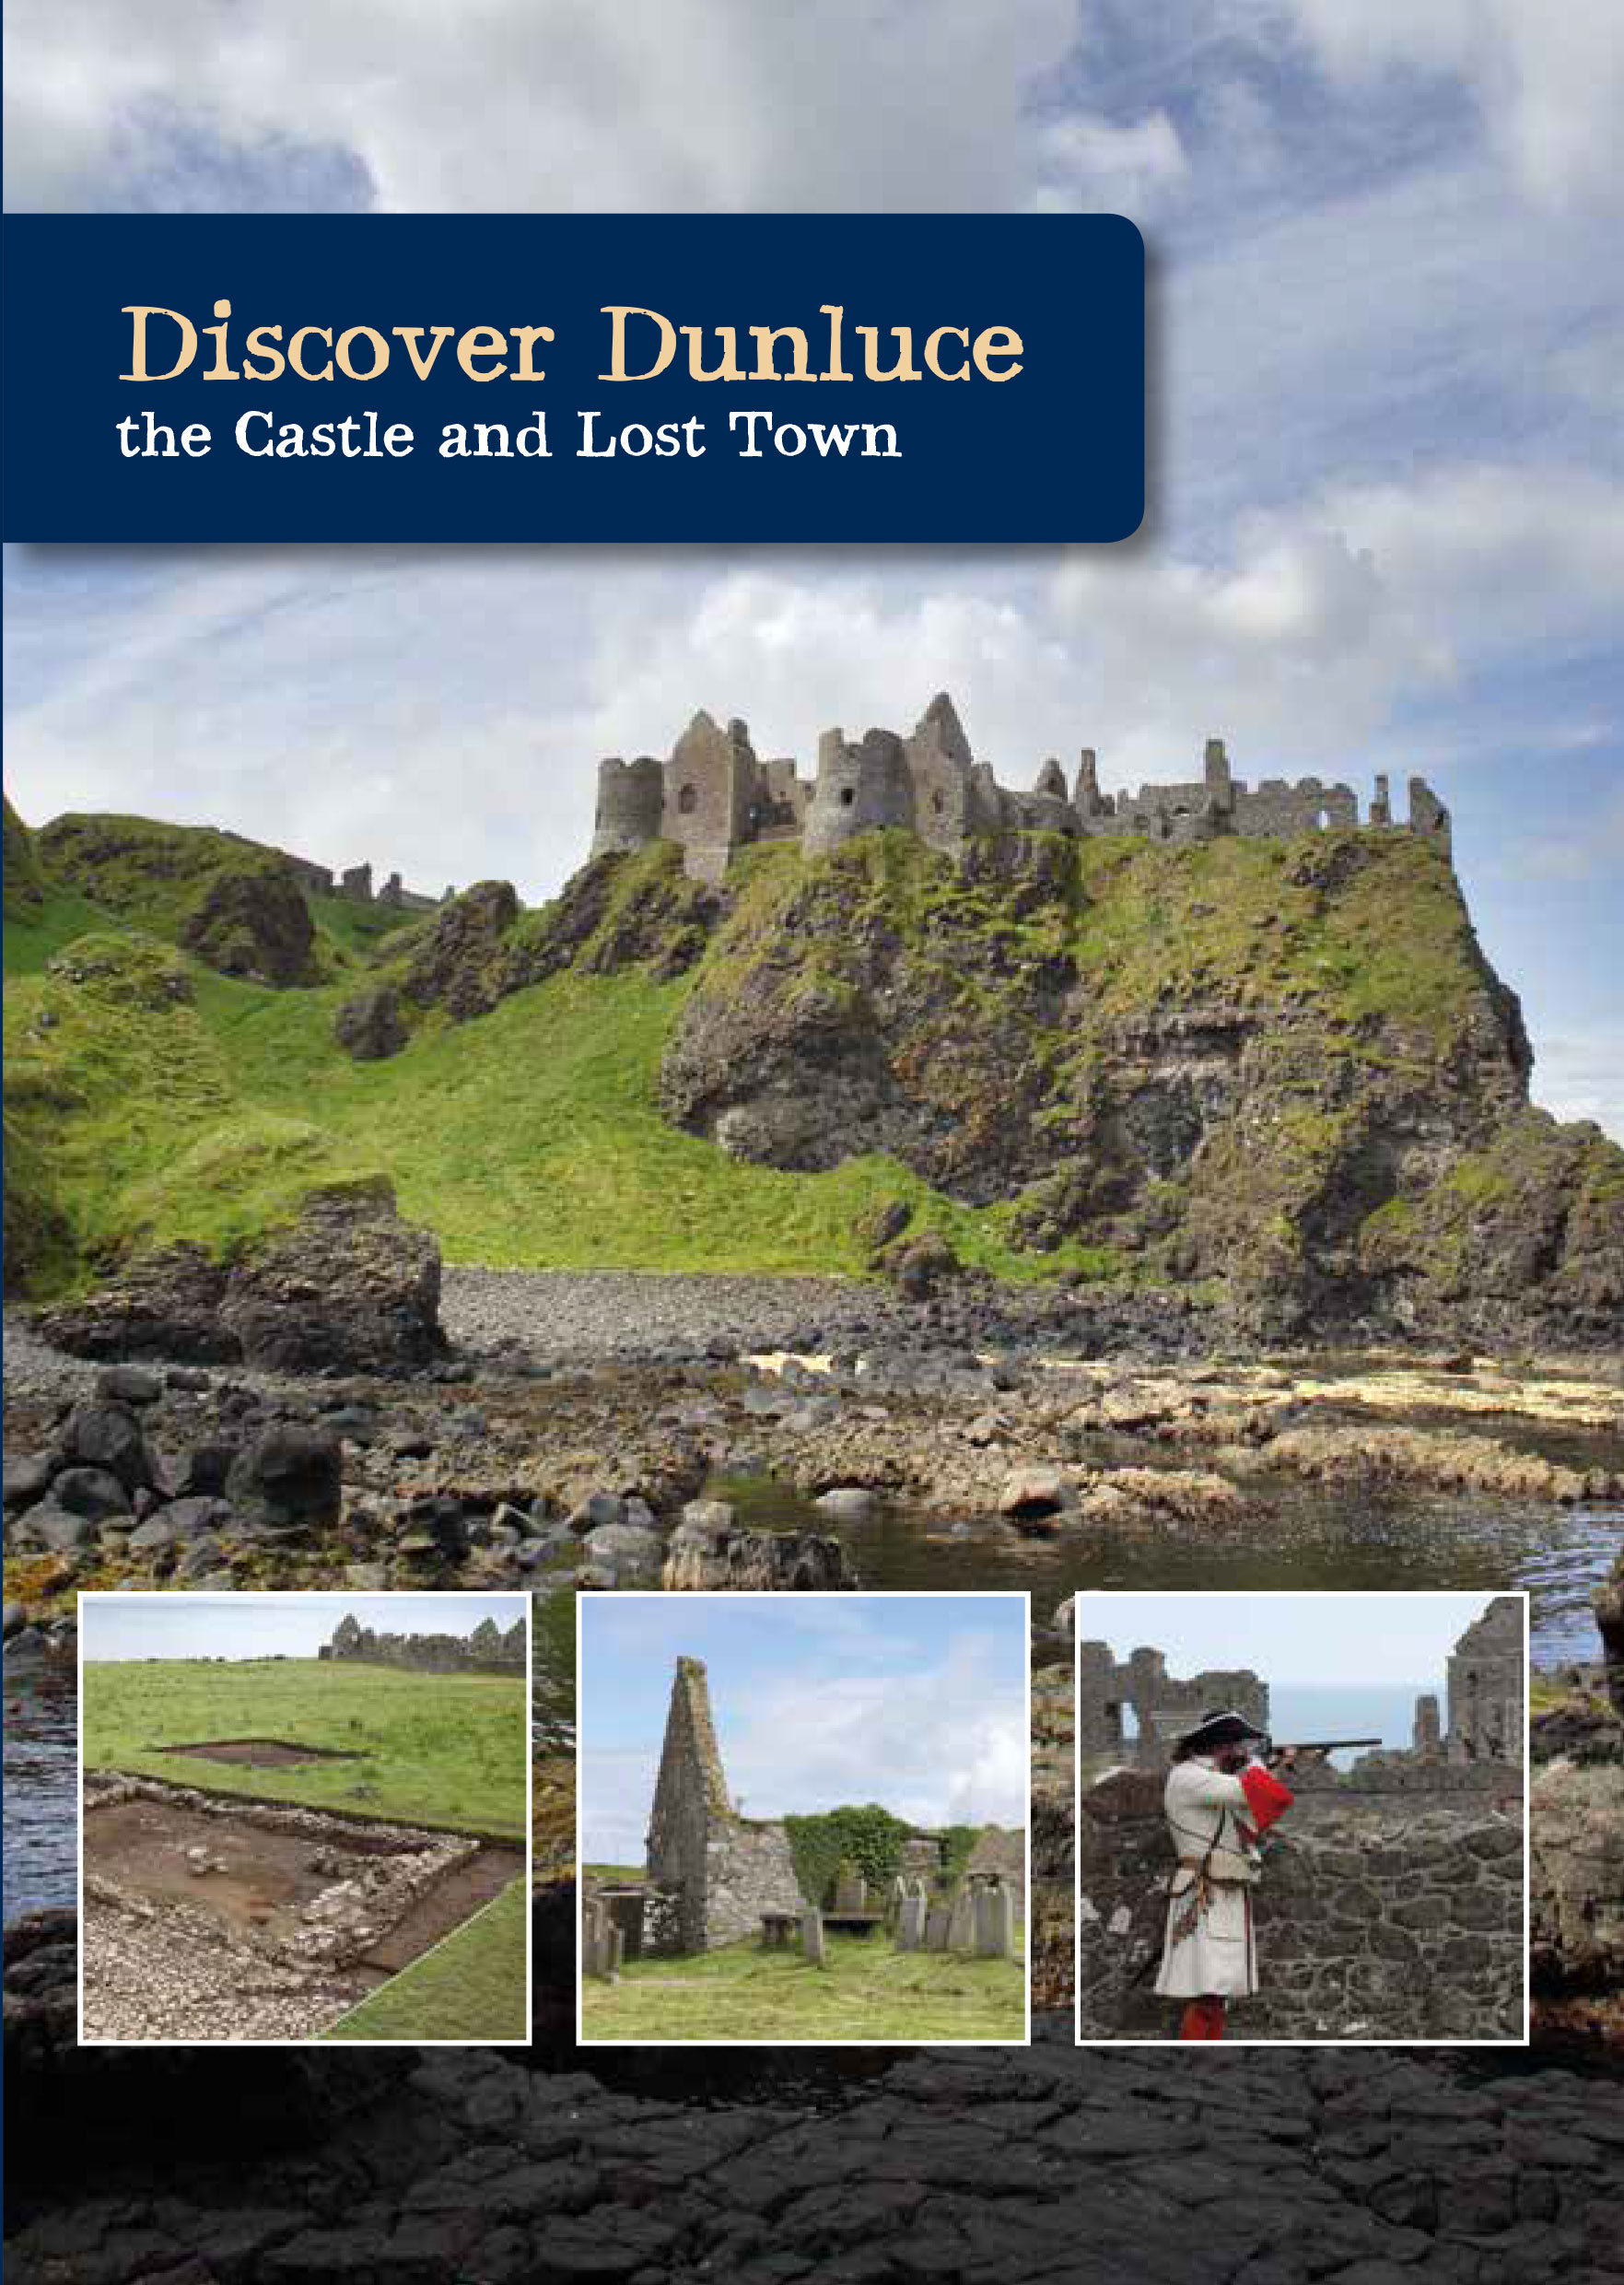 Discover Dunluce - the Castle and Lost Town